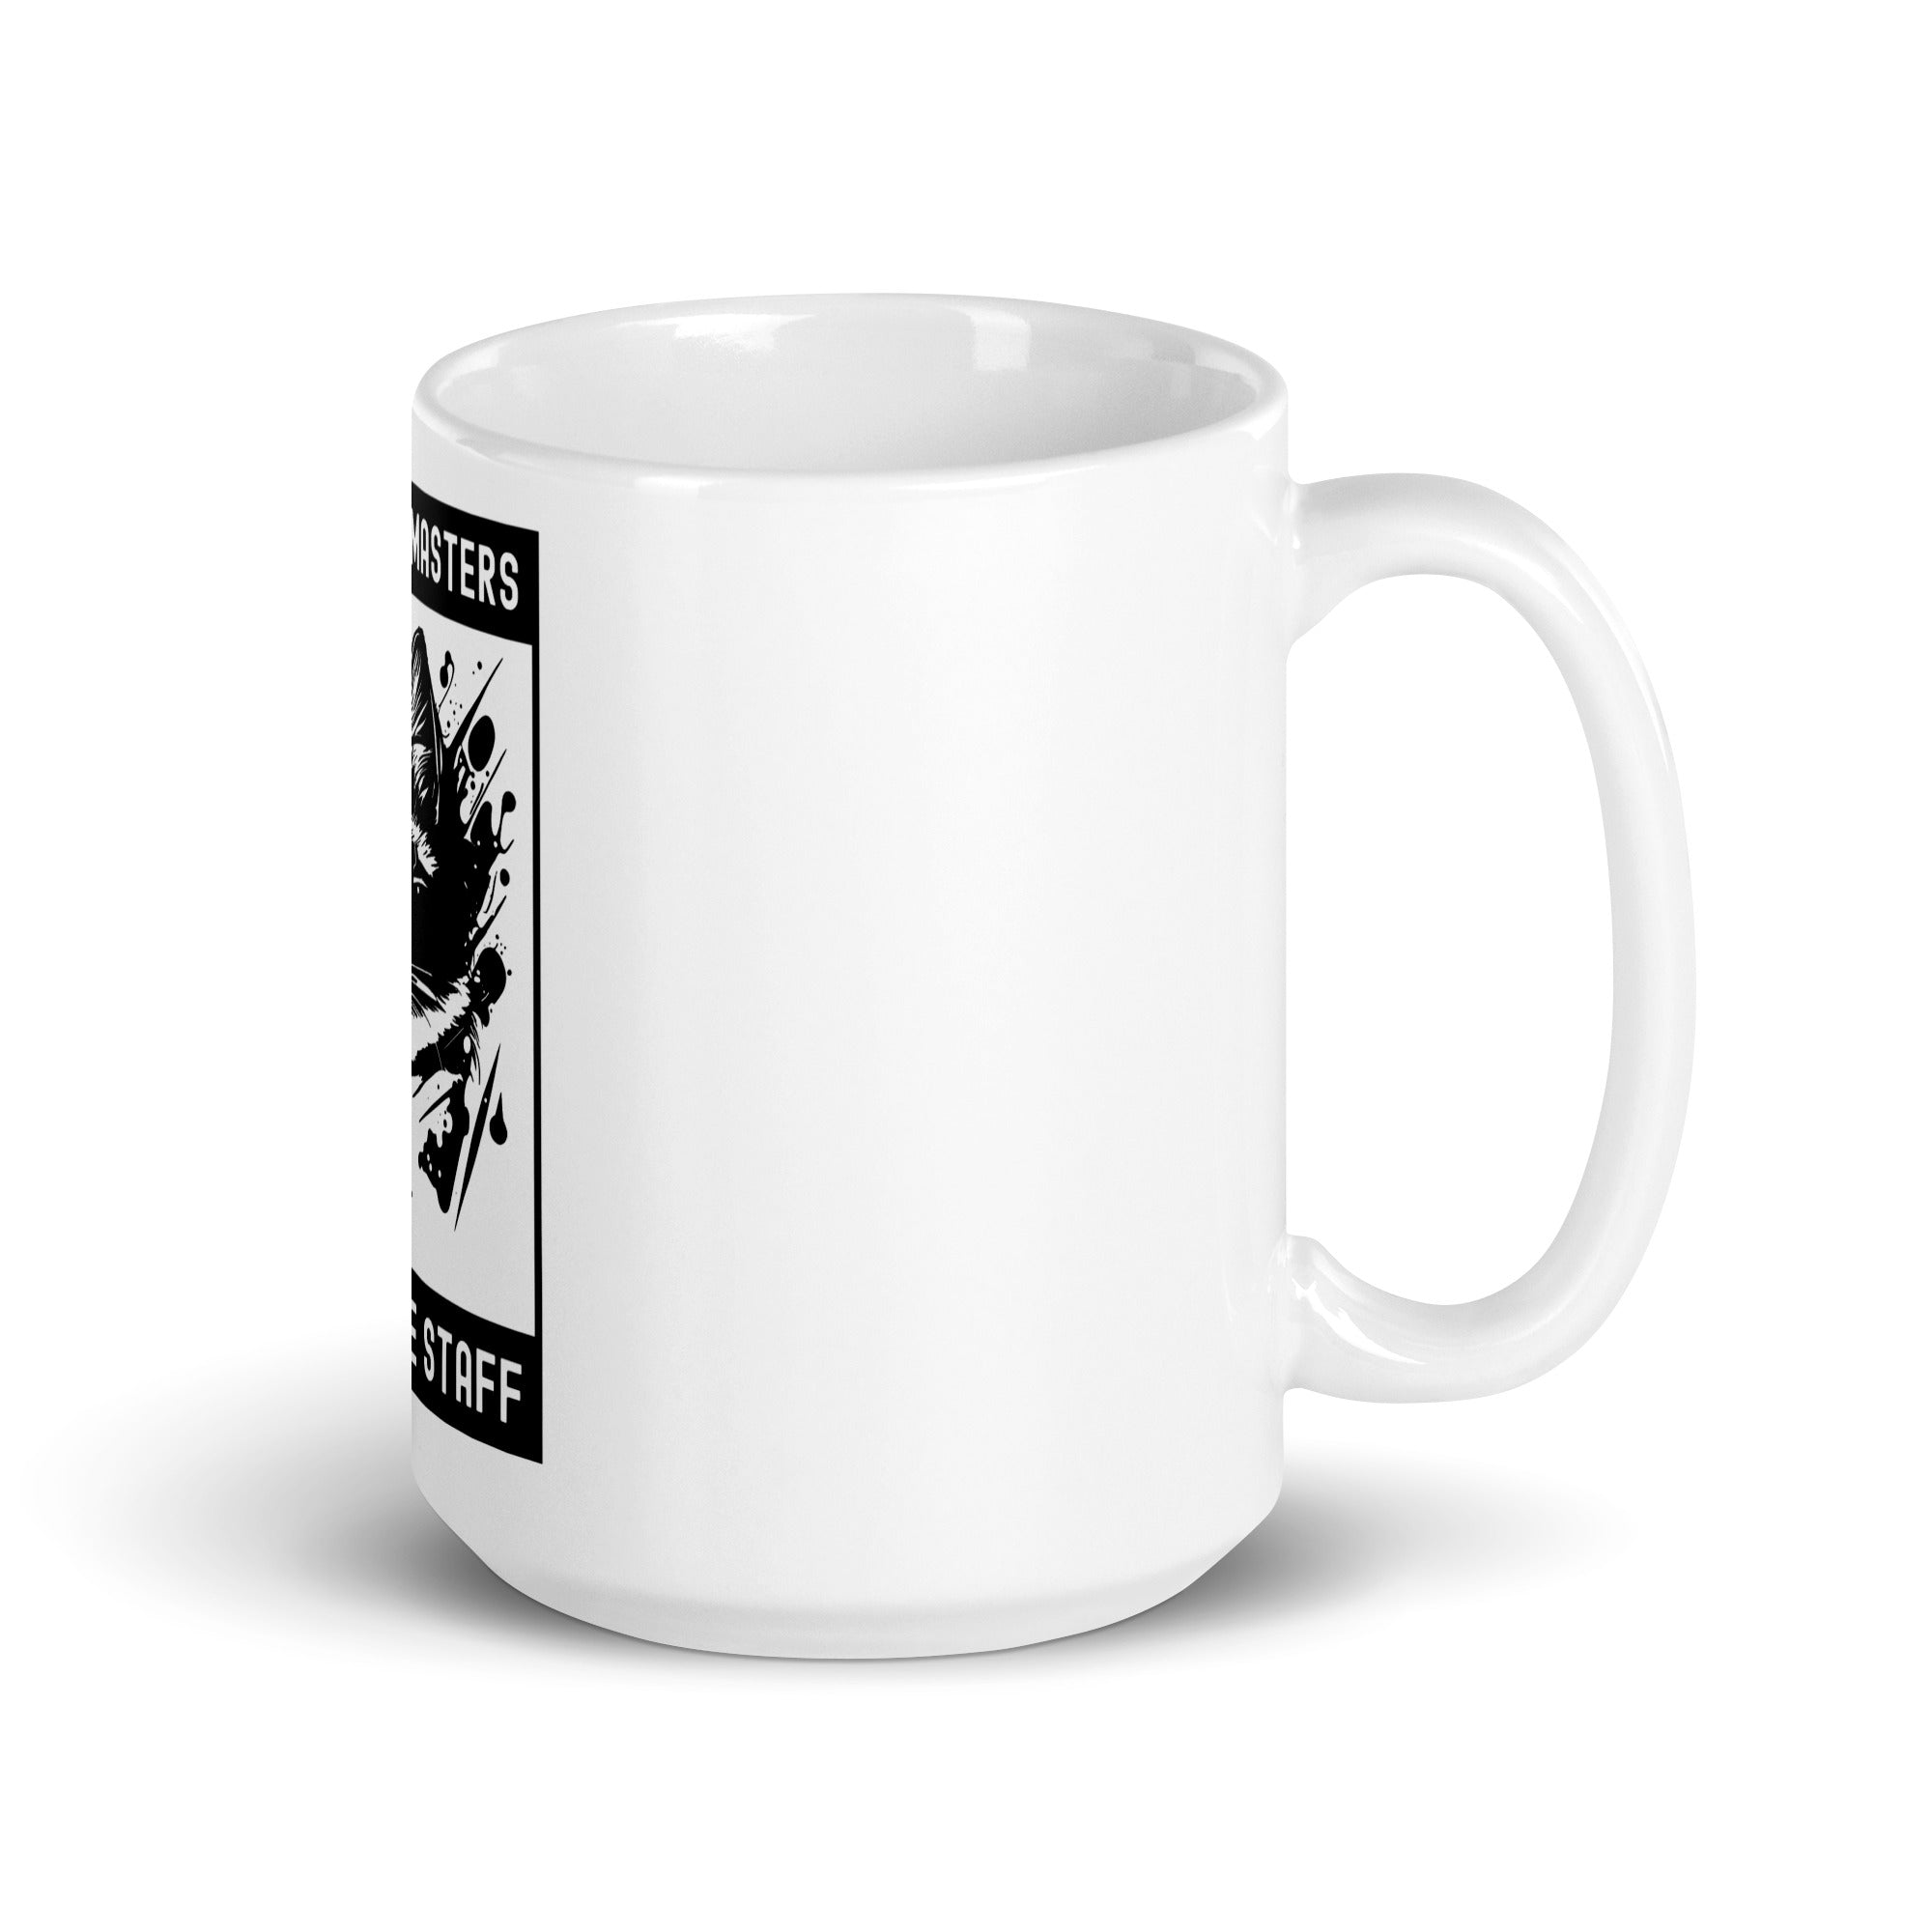 White glossy mug | Dogs have masters cats have staff